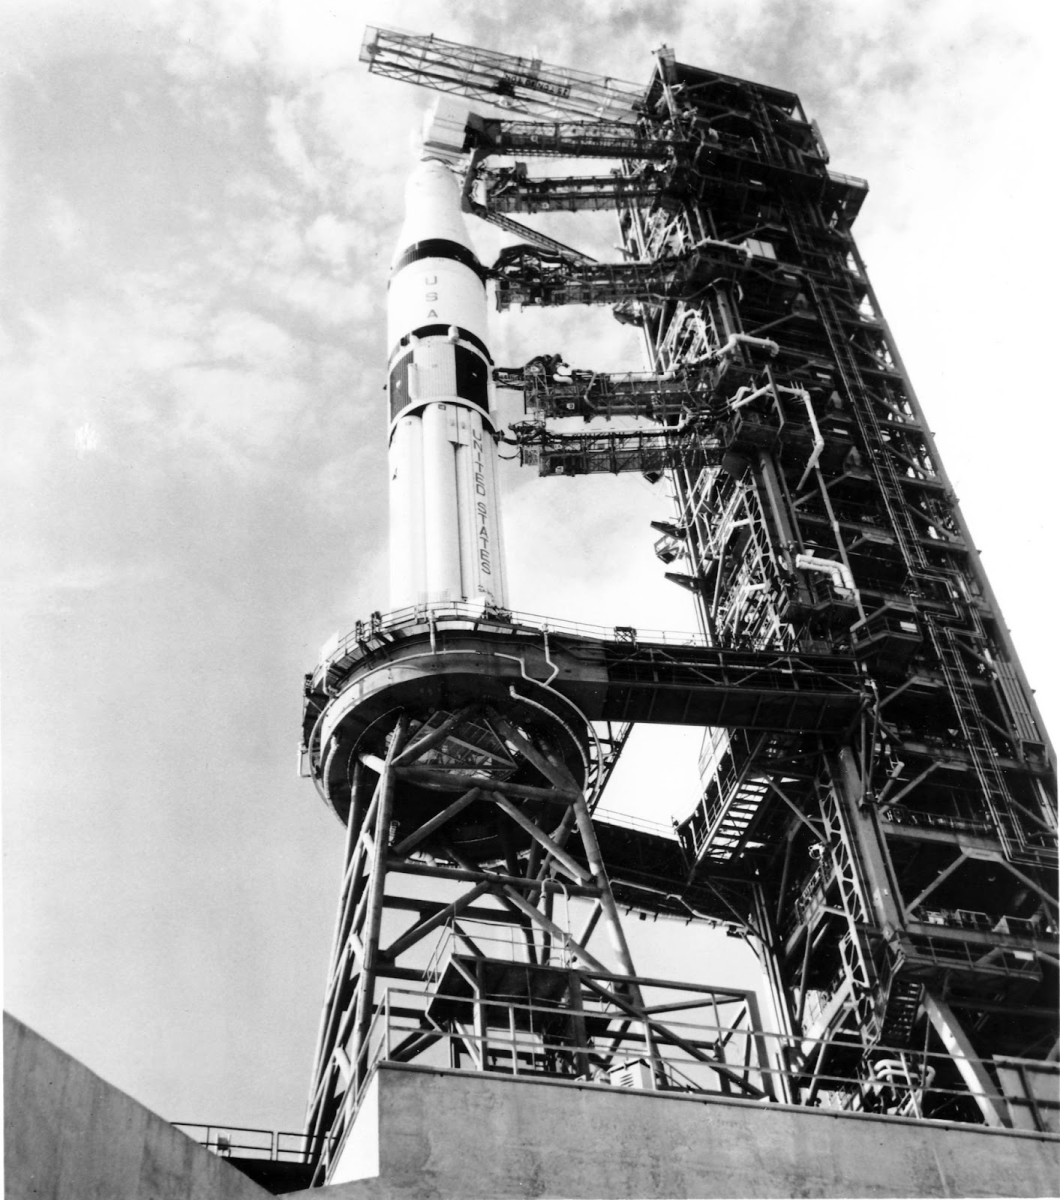 Saturn V rocket, partially built by The Chrysler Aerospace program, which came before SpaceX